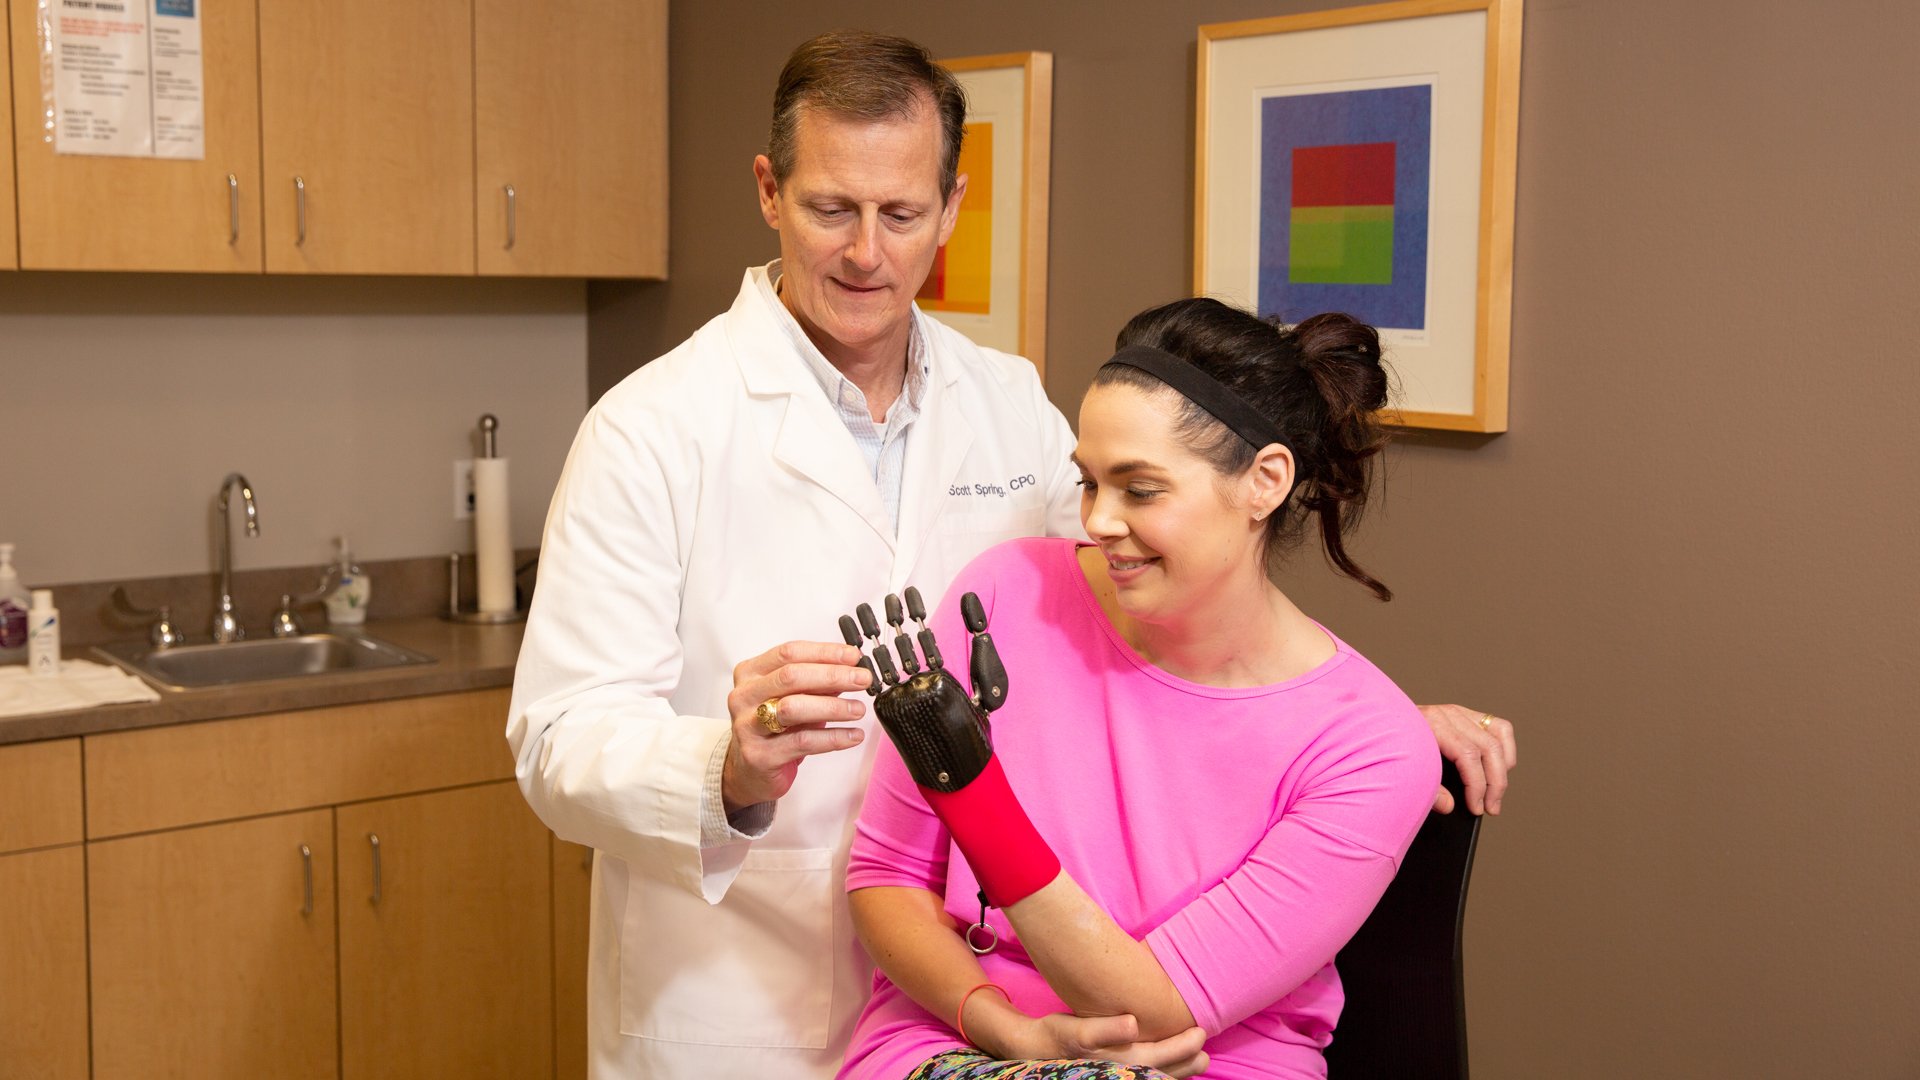 Scott Spring, prosthetist, works with partial hand patient with custom silicone passive prosthesis